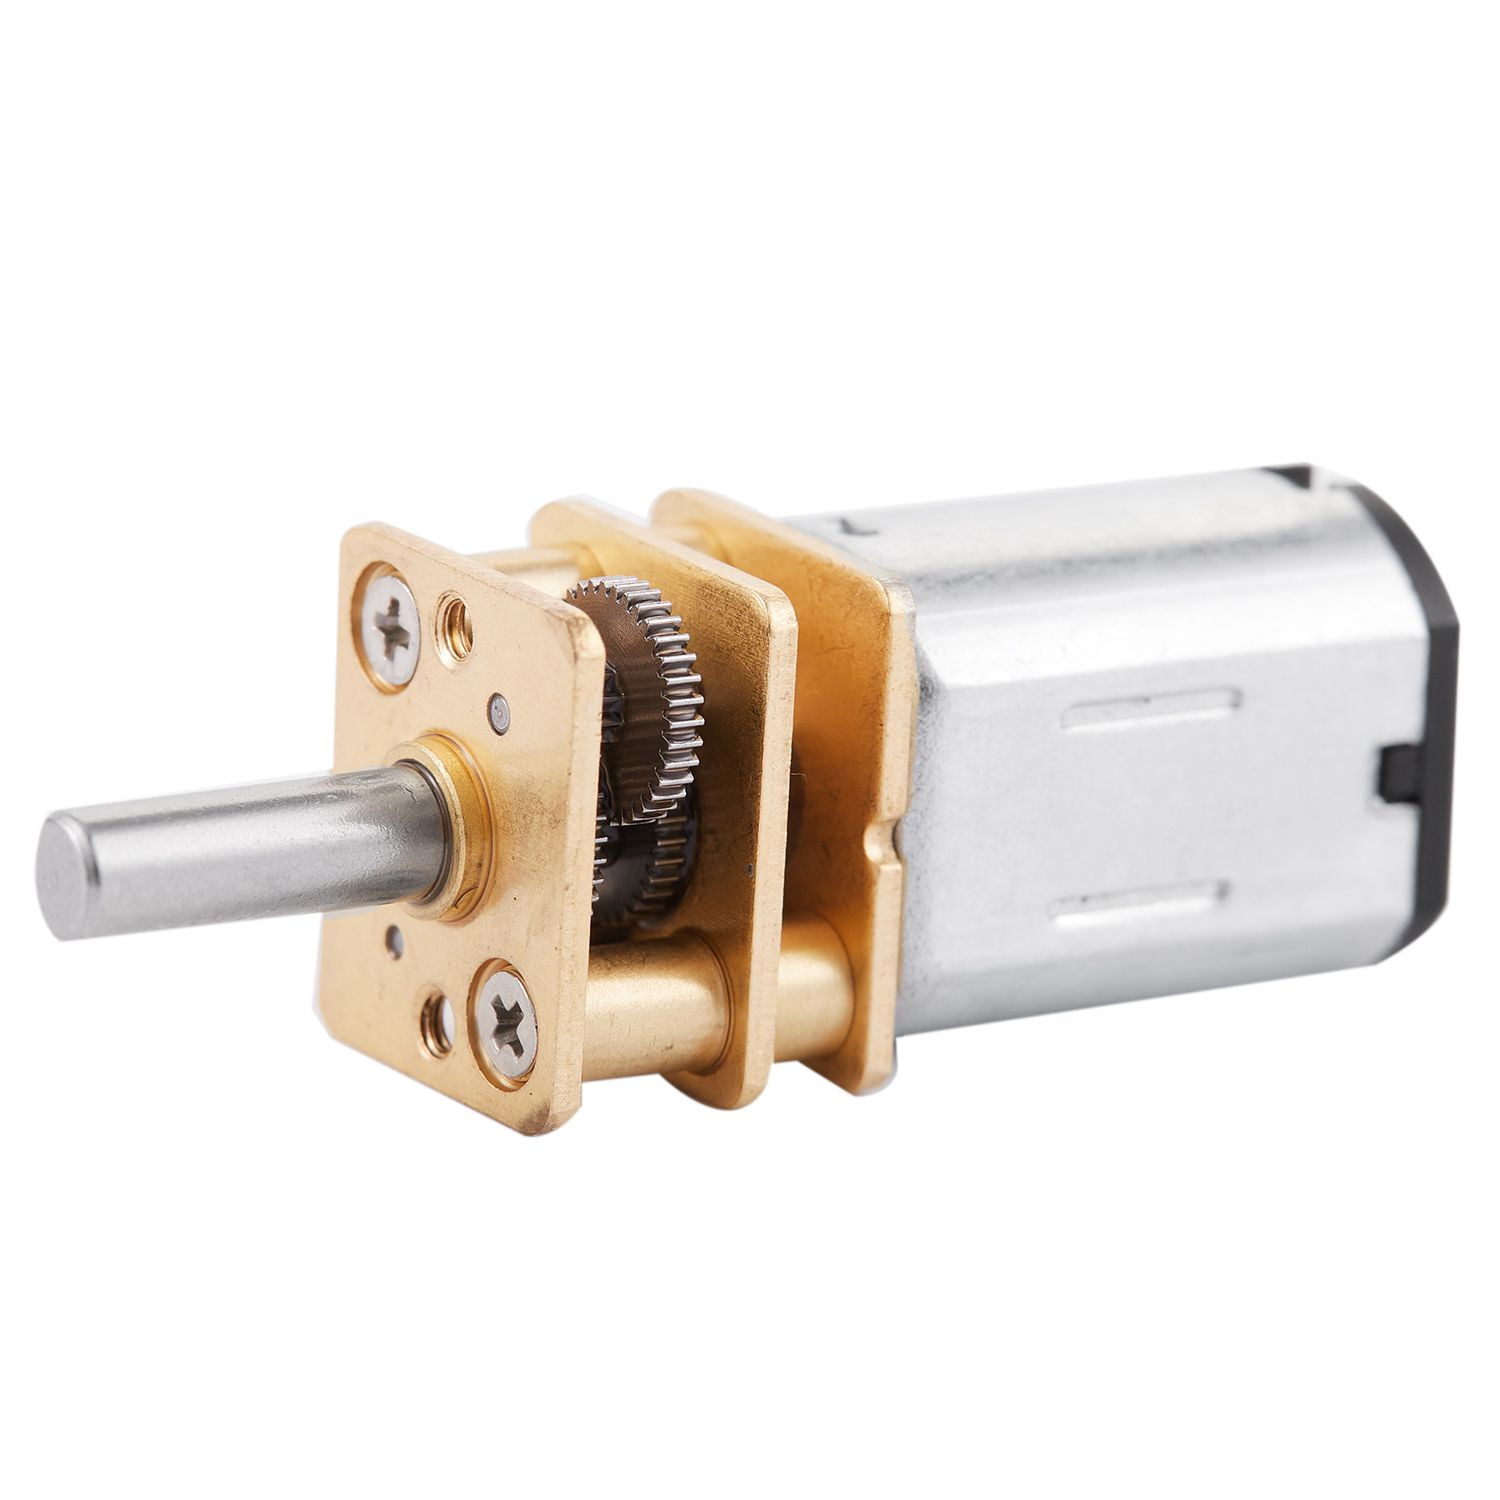 Micro Speed Reduction Gear Motor with Metal Gearbox Wheel DC12V 60RPM N20 